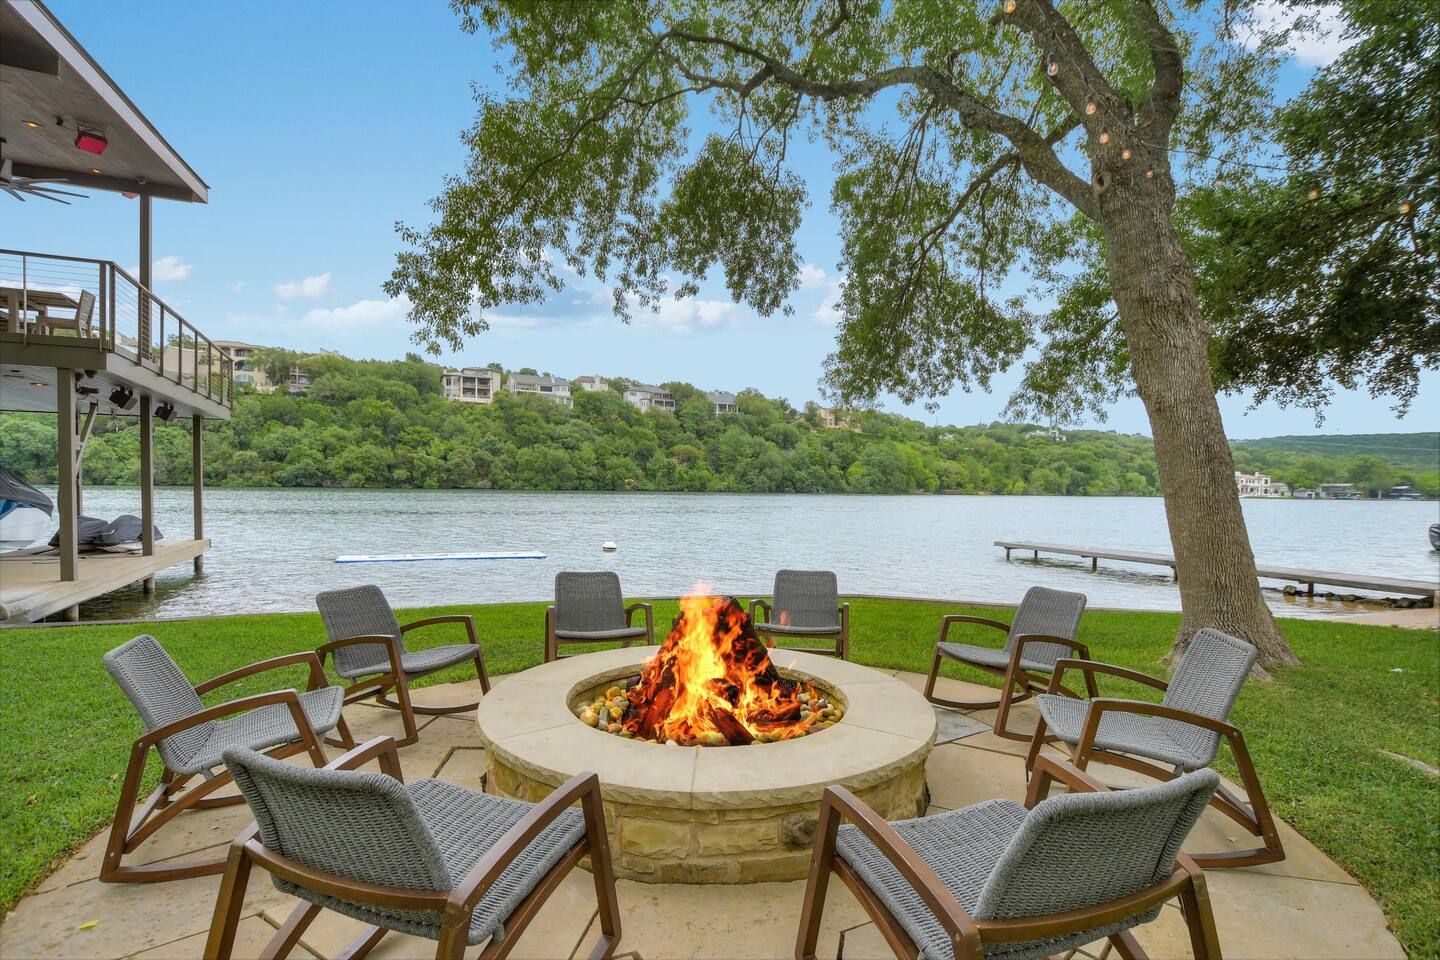 Unwind in the dock lounge area or gather around the firepit by the water's edge.